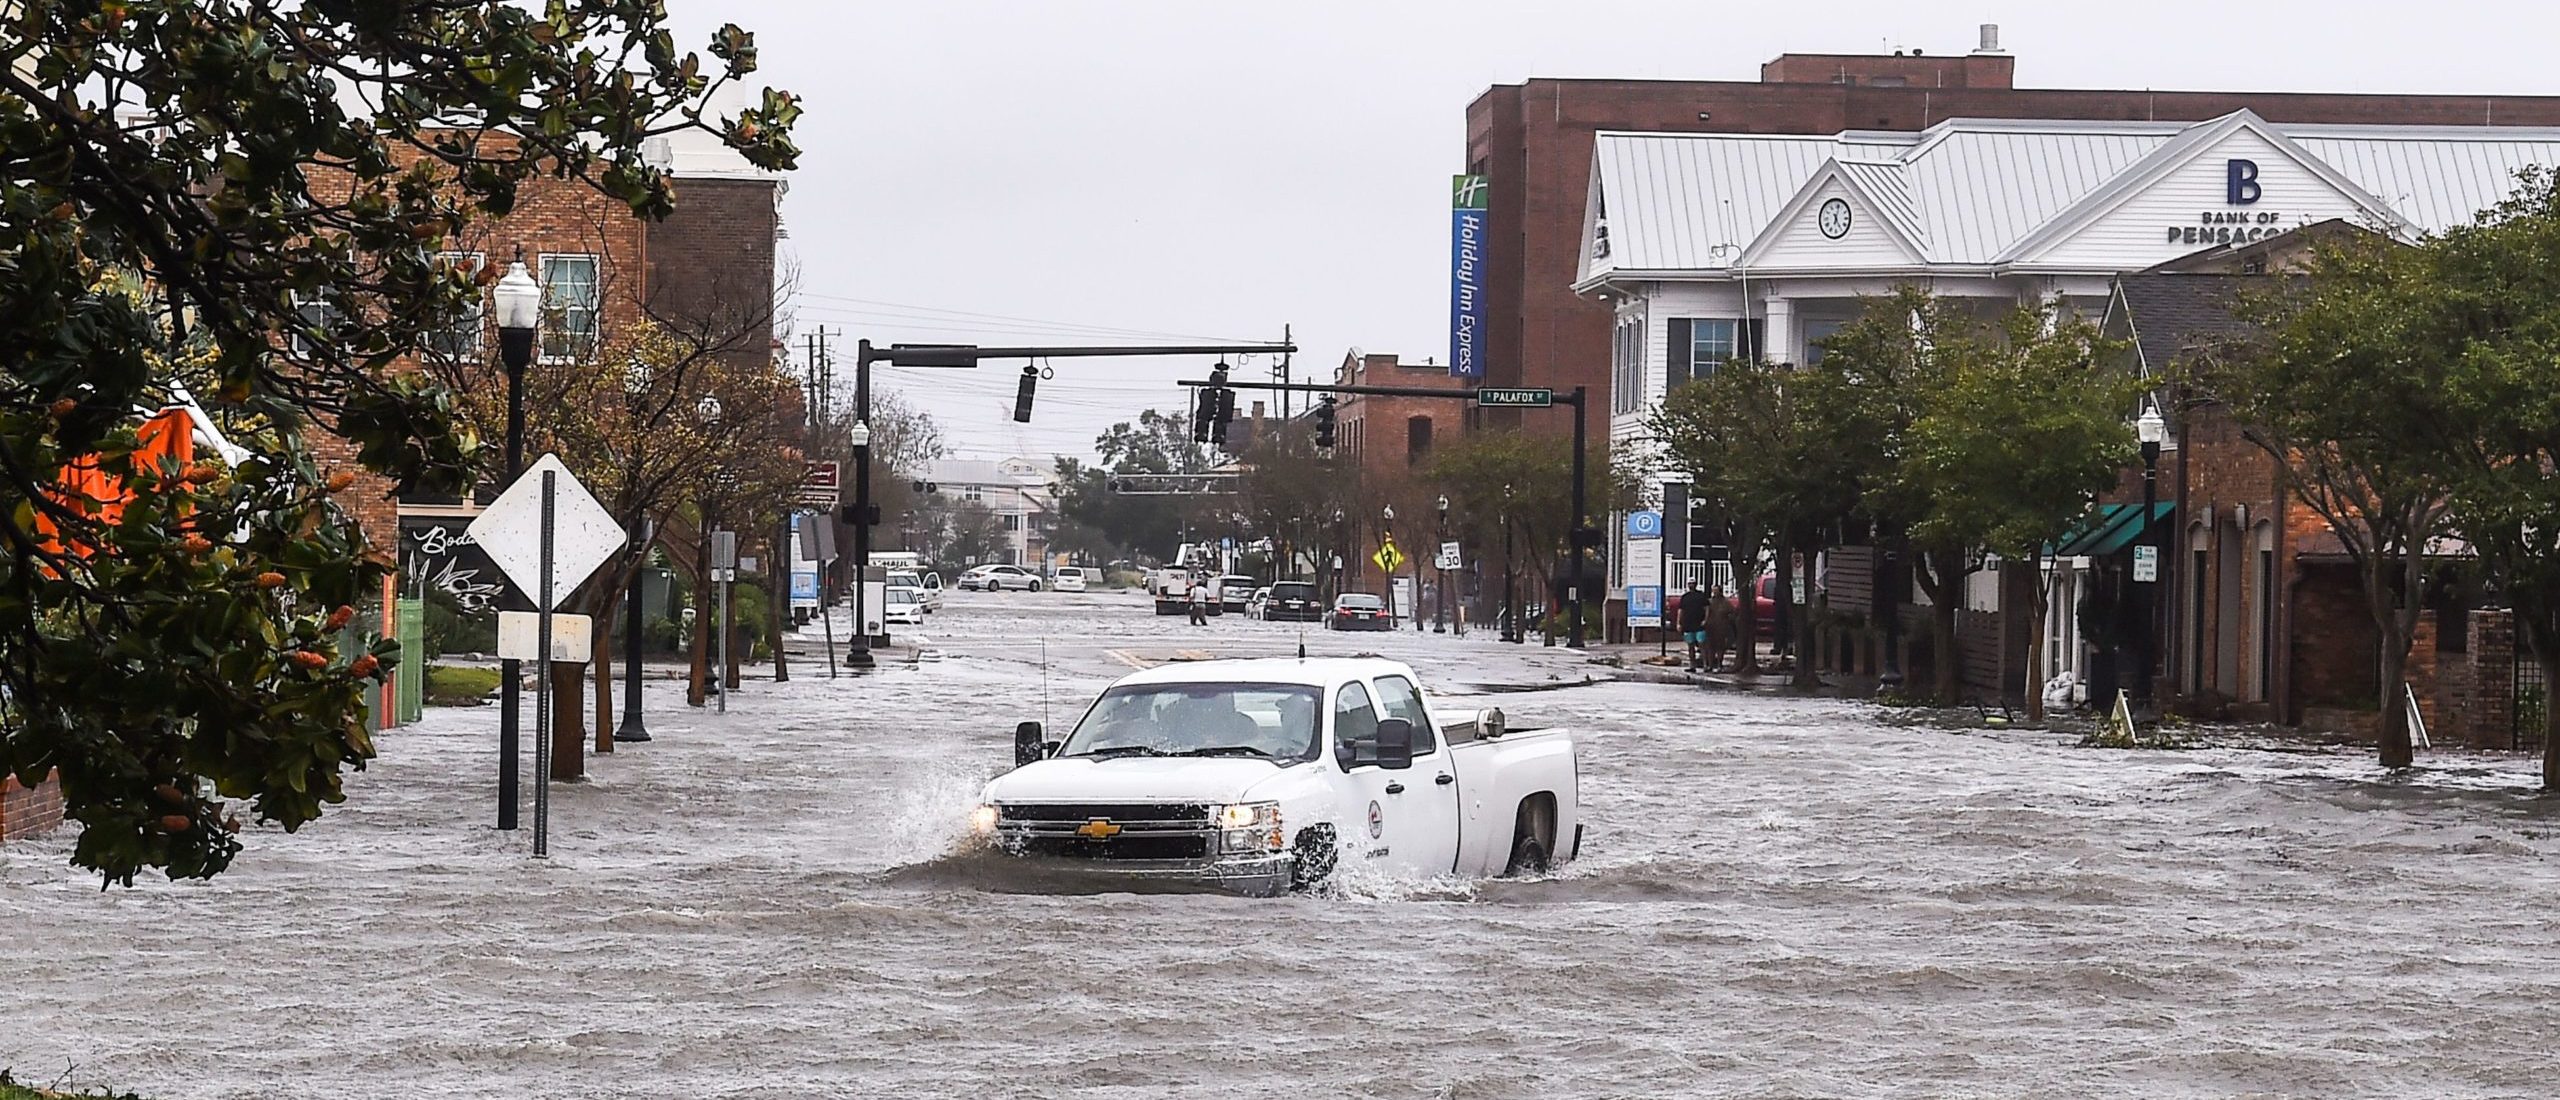 Hurricane Sally Moves Northeast After Flooding Gulf Cost | The Daily Caller